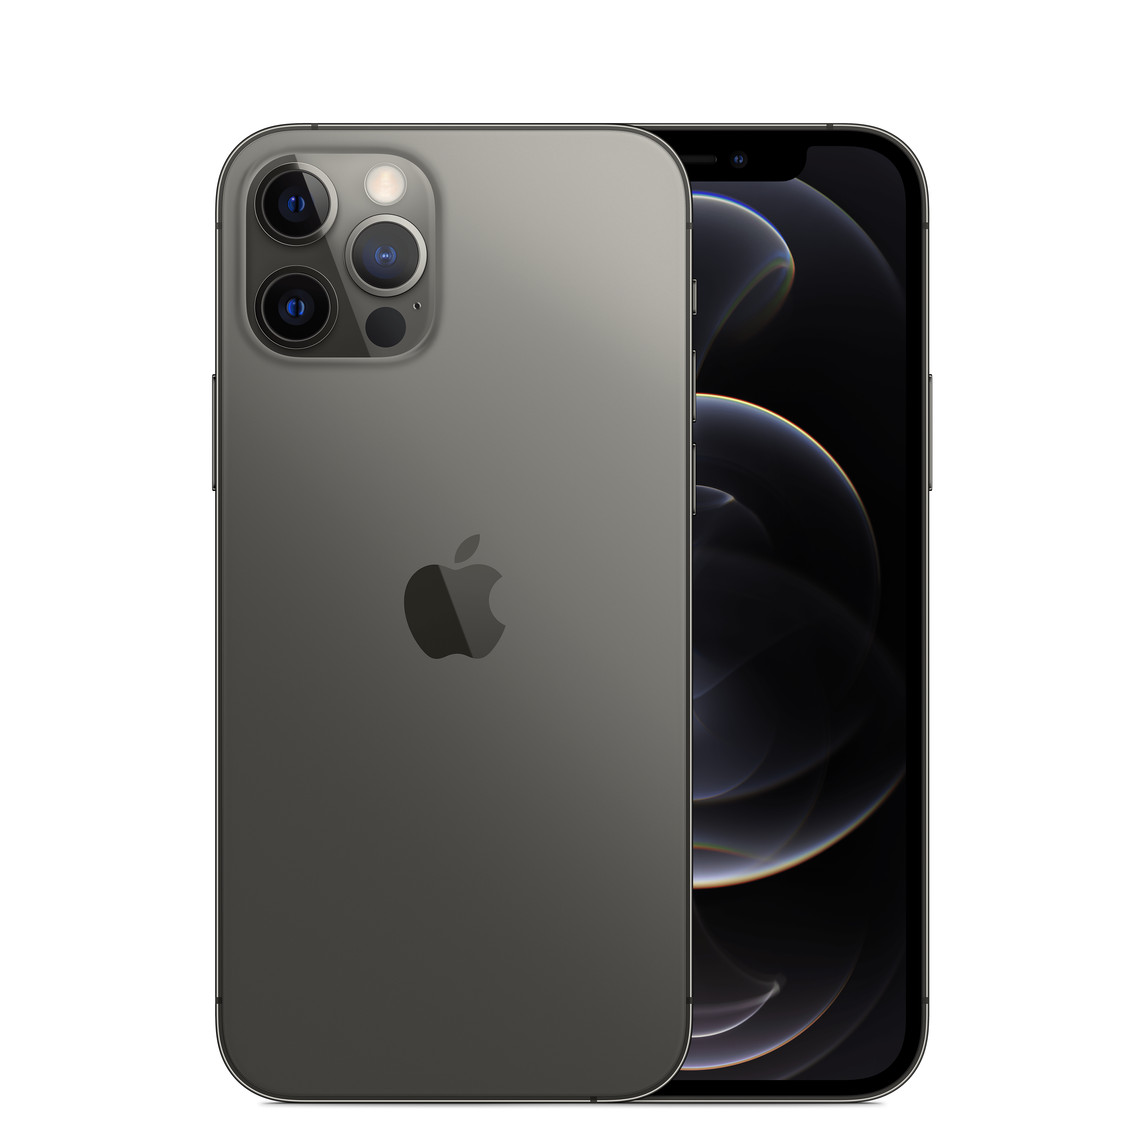 Back, black iPhone 12, Pro camera system with True Tone flash. Front, all-screen display